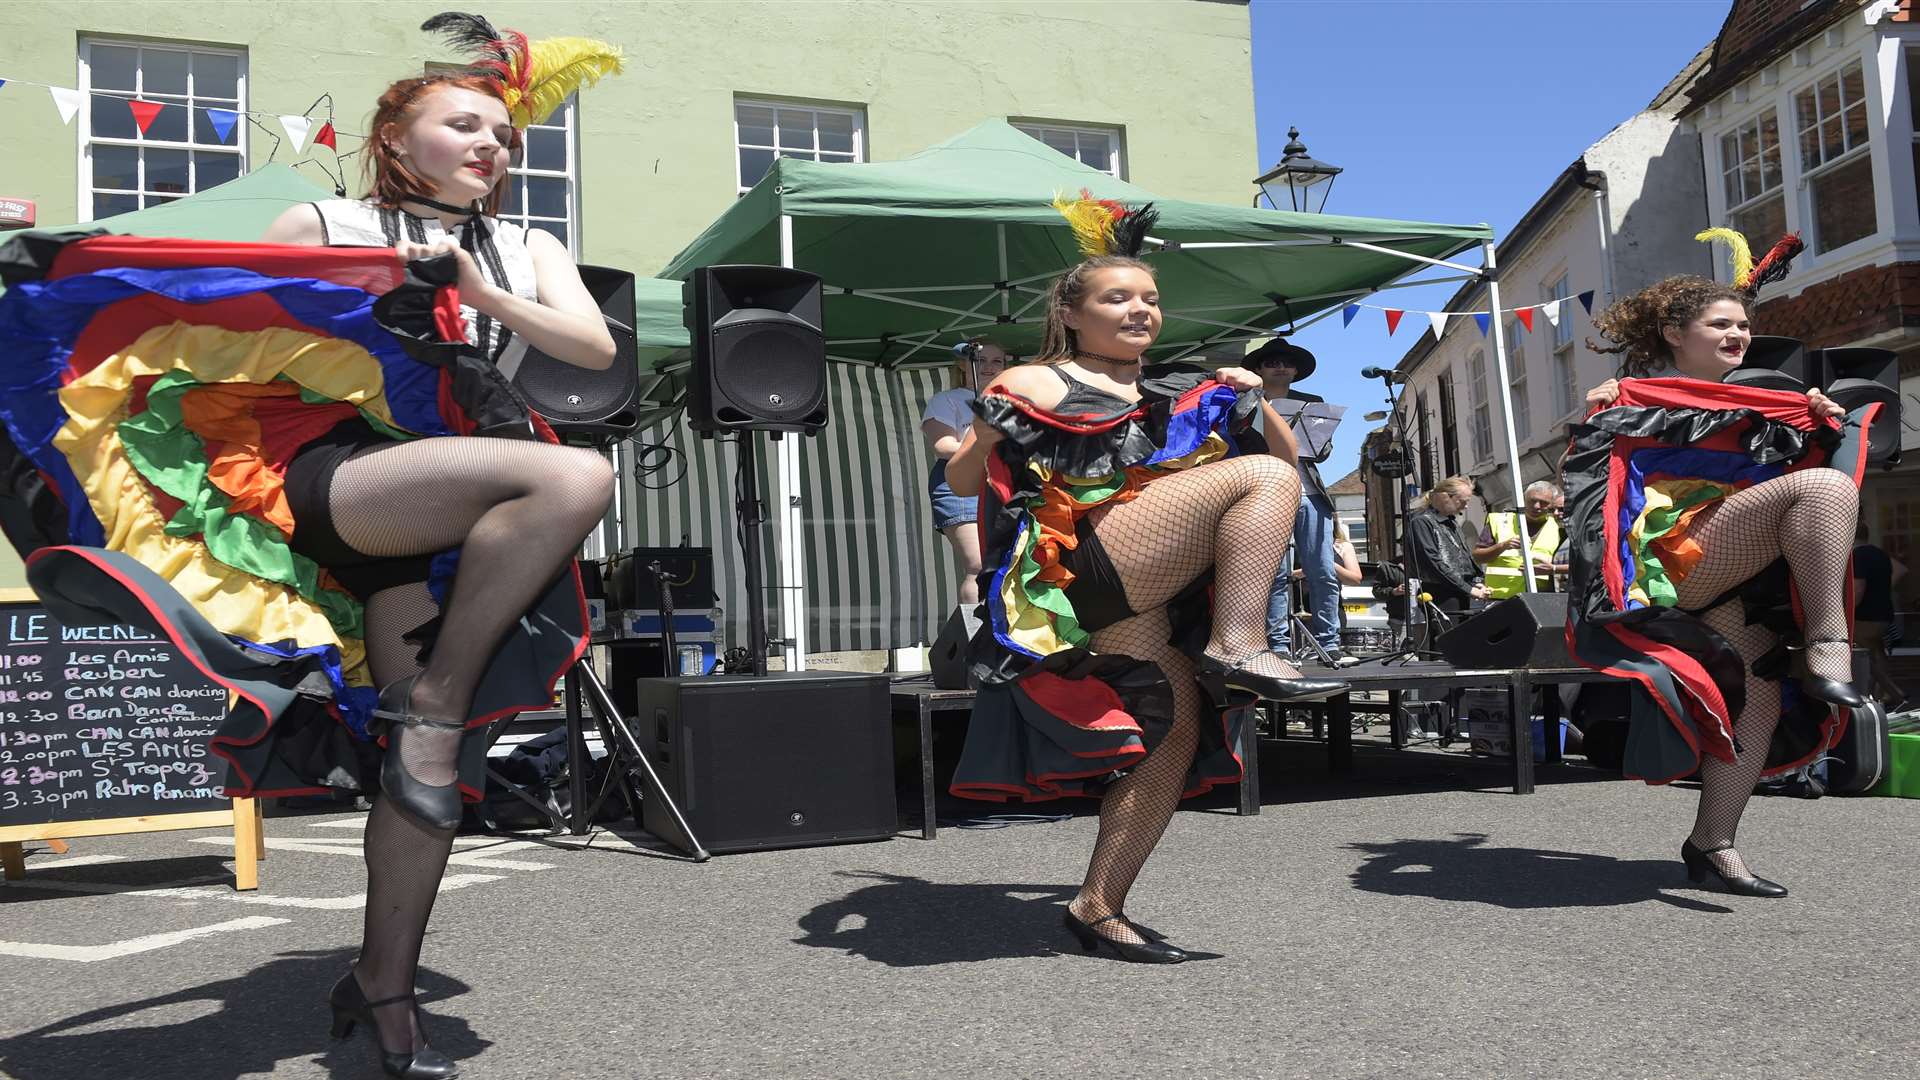 Dancers took to the streets as part of the French themed event